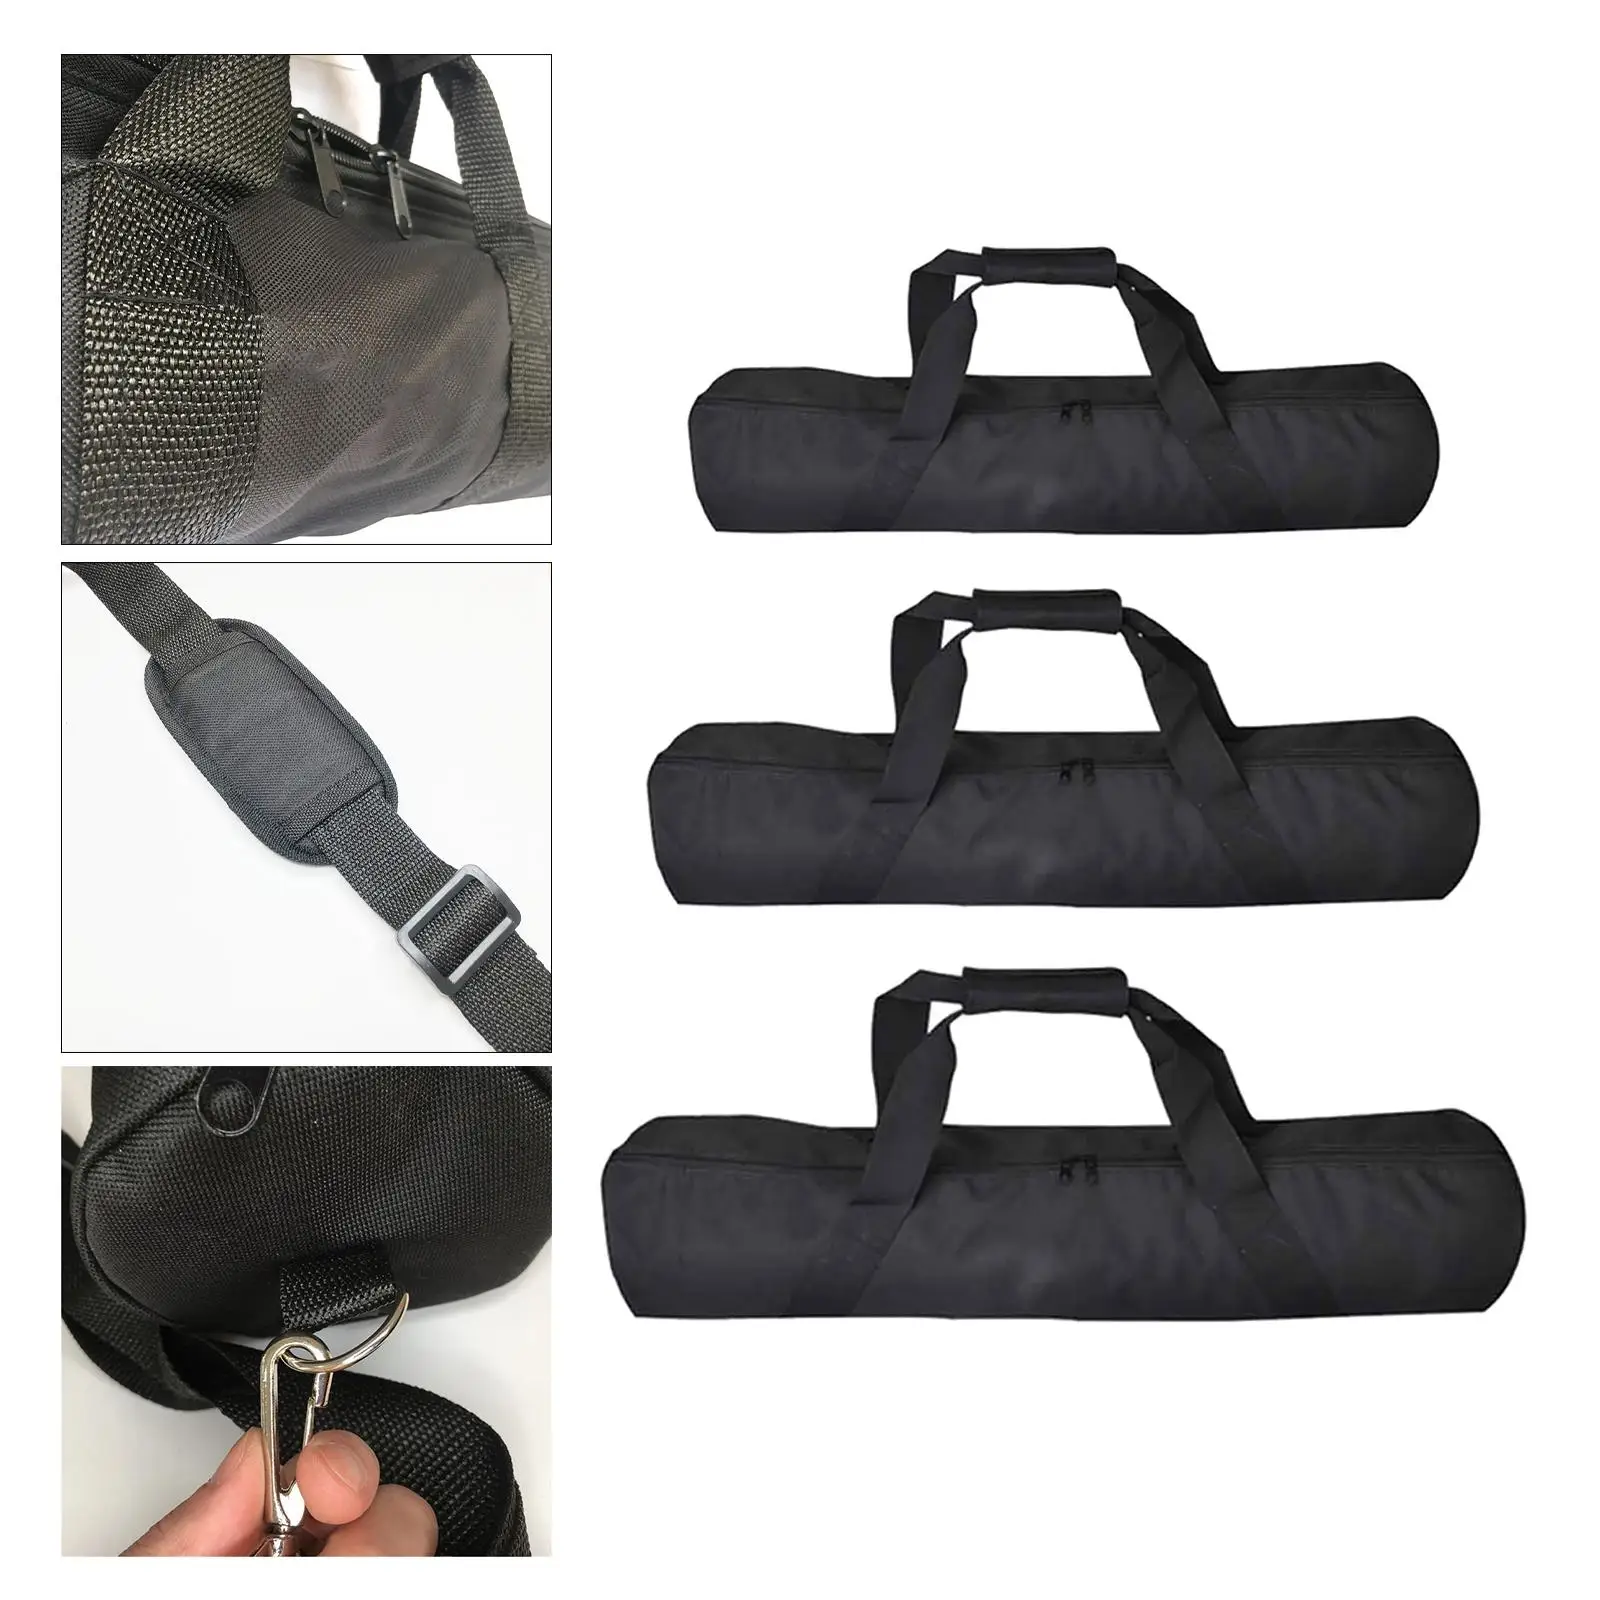 Portable Fishing Rod Reel Bag with Strap Fishing Tackle Bag Traveling Fishing Gears Case